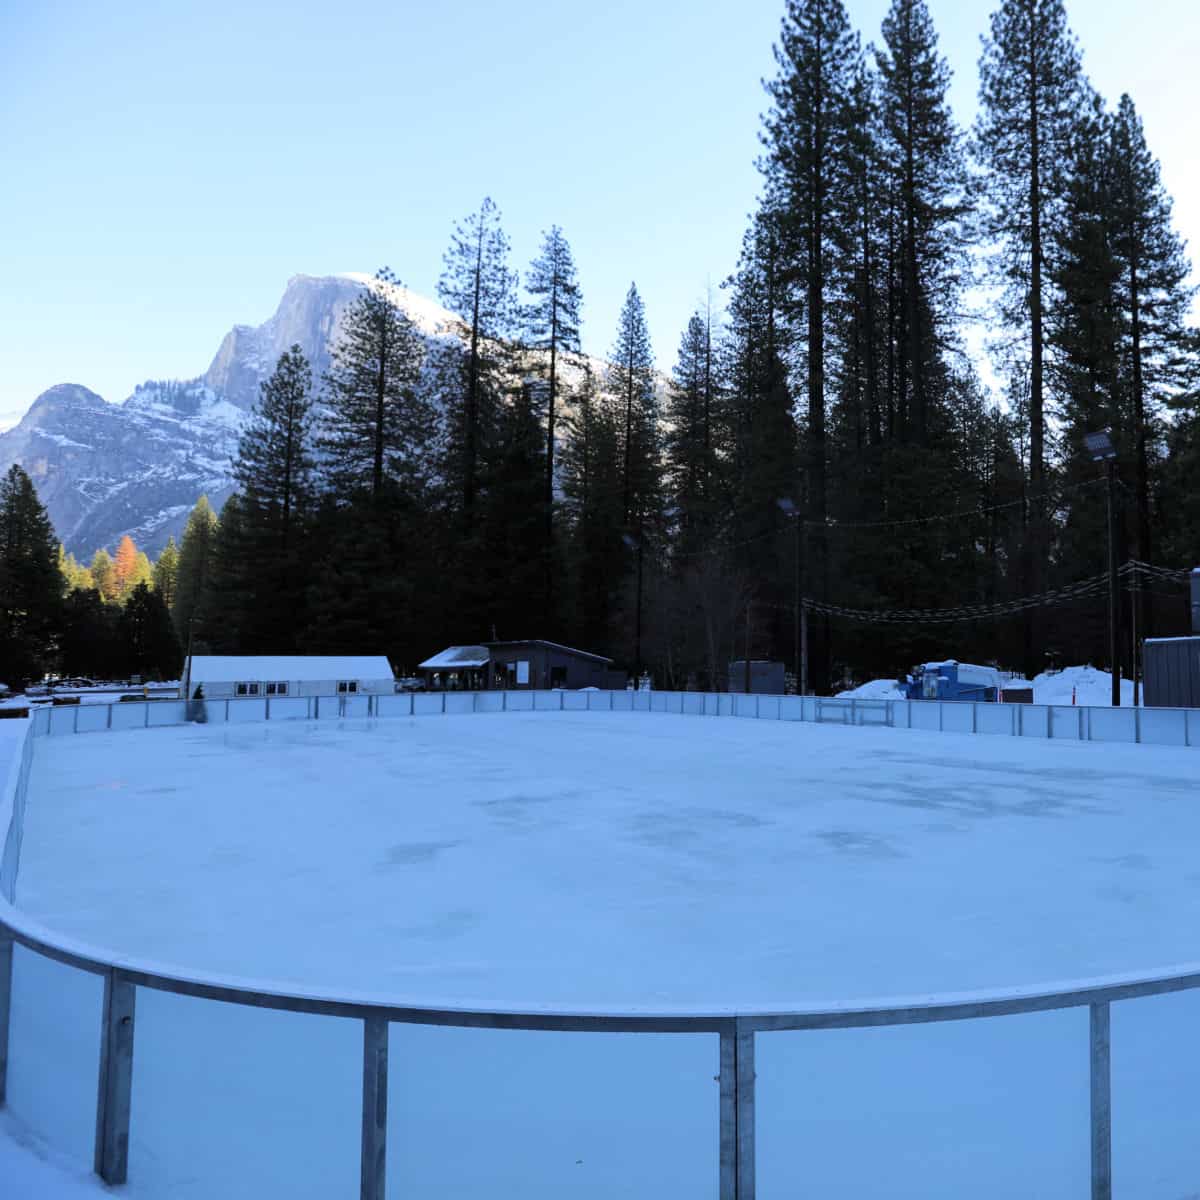 Curry Village Ice Skating Rink with views of Half Dome in Yosemite National Park California